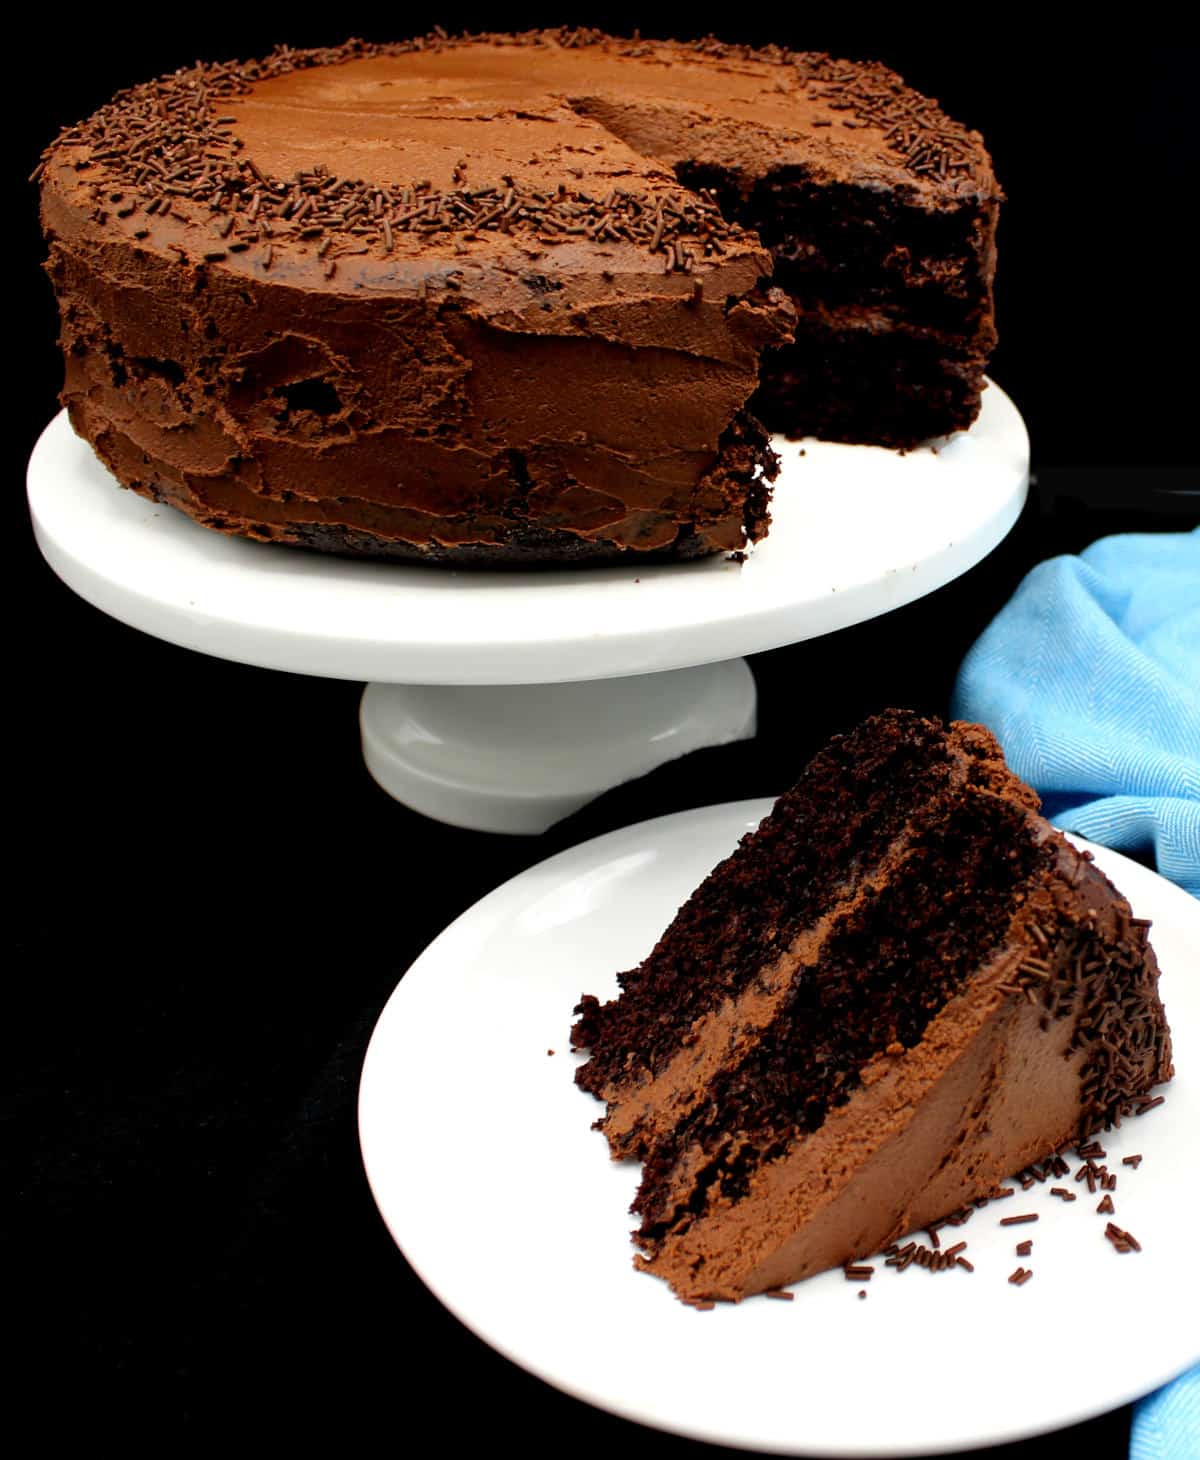 A slice of a two-layer vegan chocolate cake on white plate with full cake on cake stand in background.